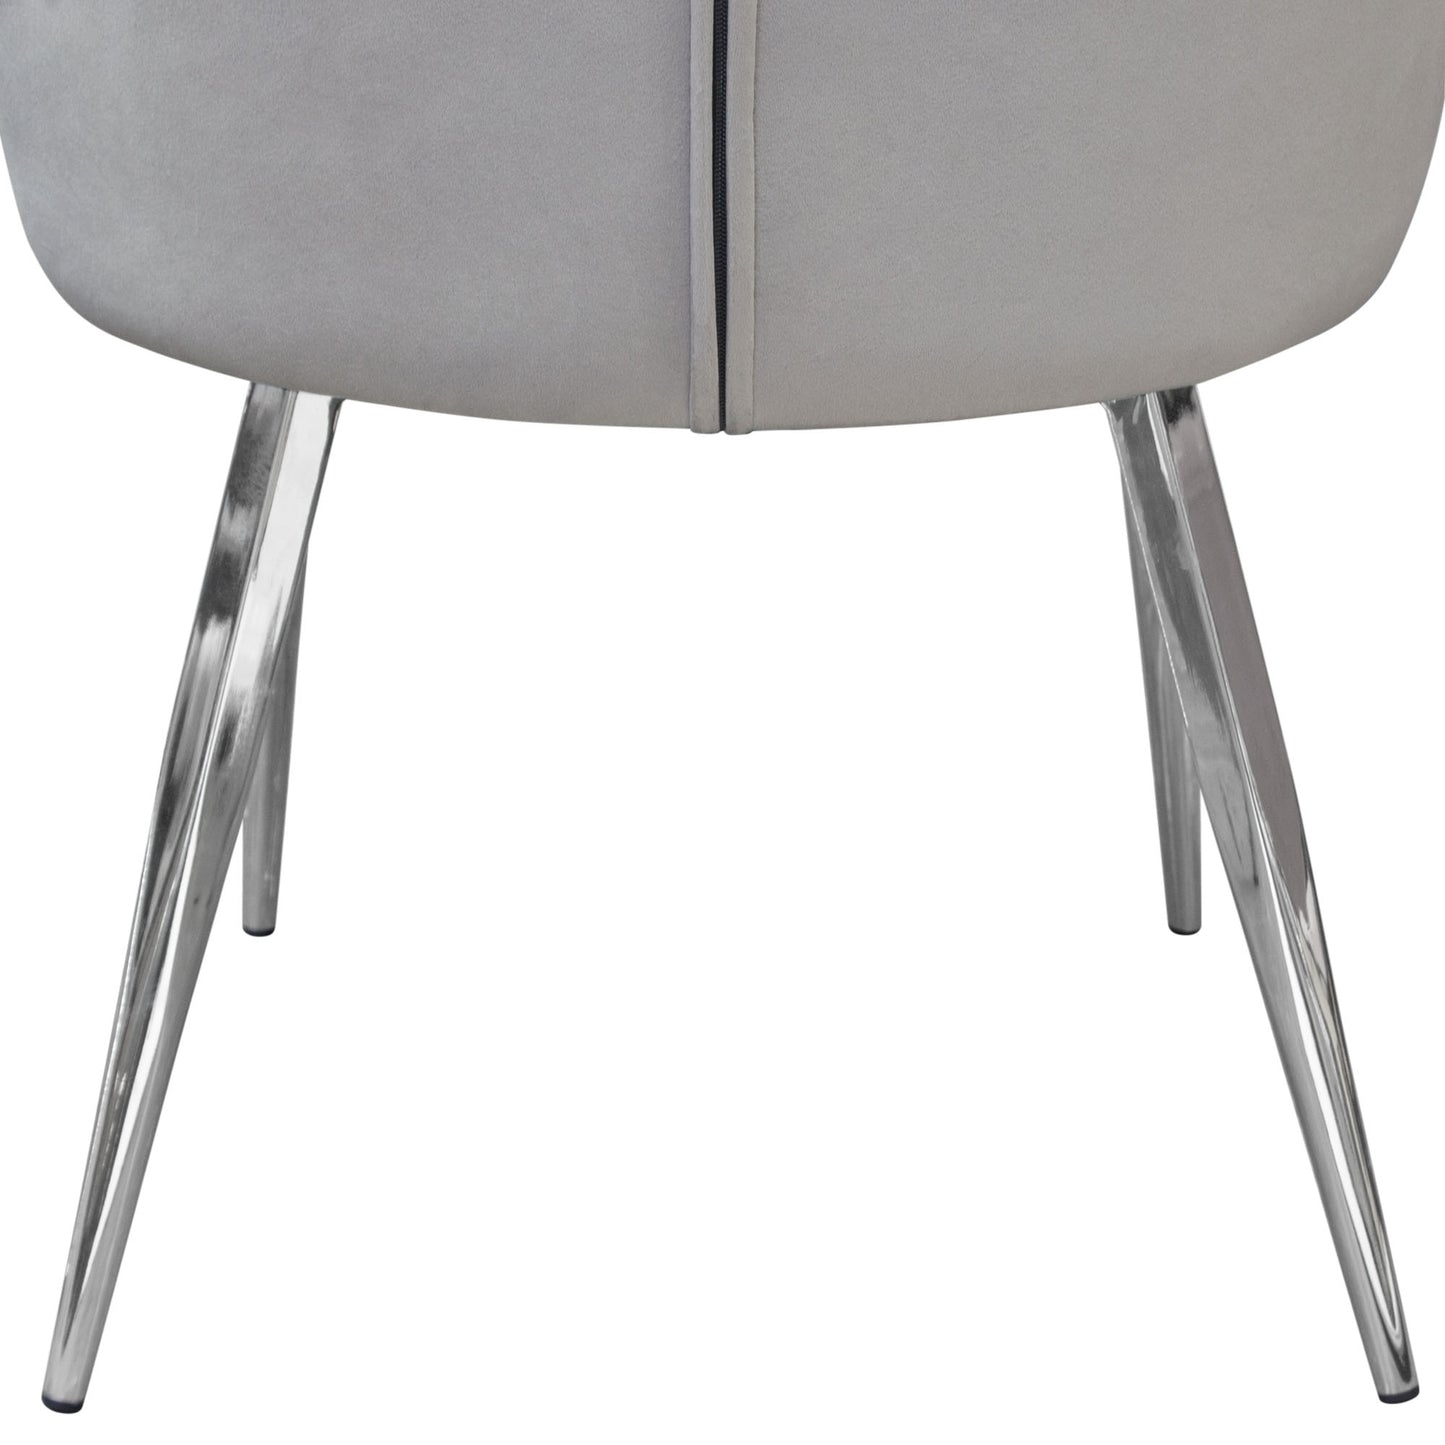 Grace Solid Back Side Chair 